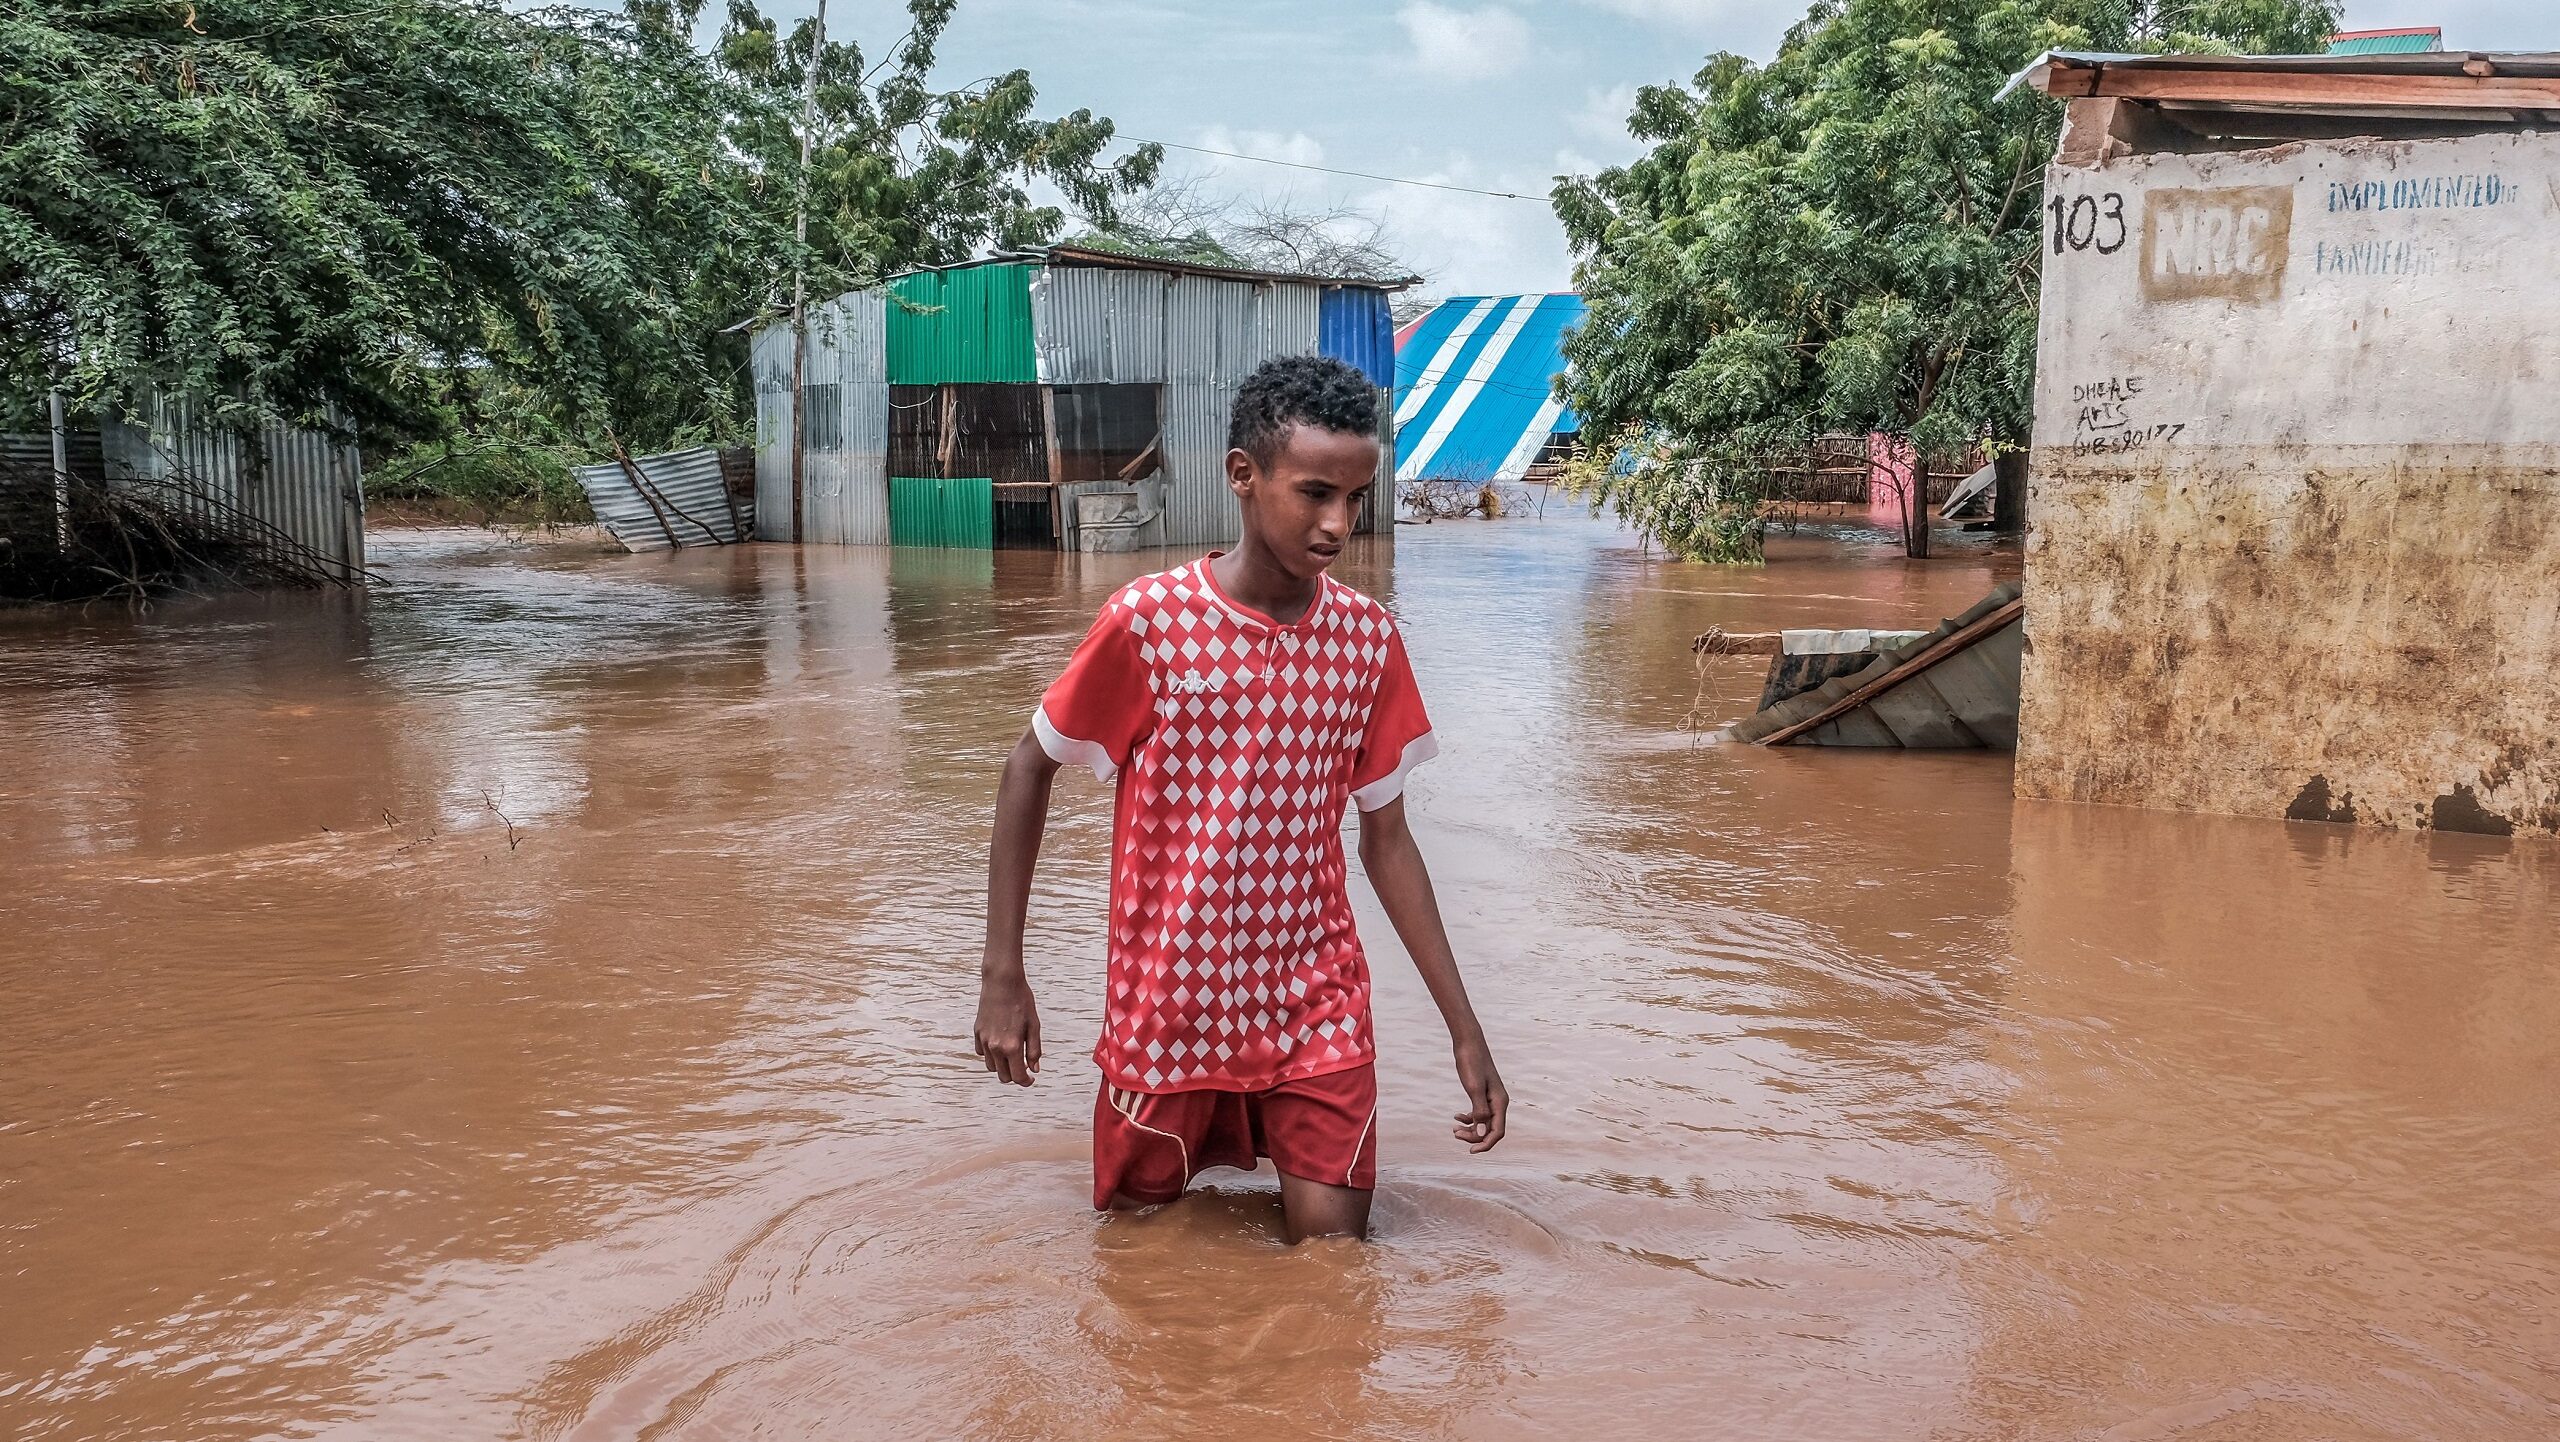 Somalia Floods Claim Nearly 100 Lives Amid Ongoing Hunger Crisis